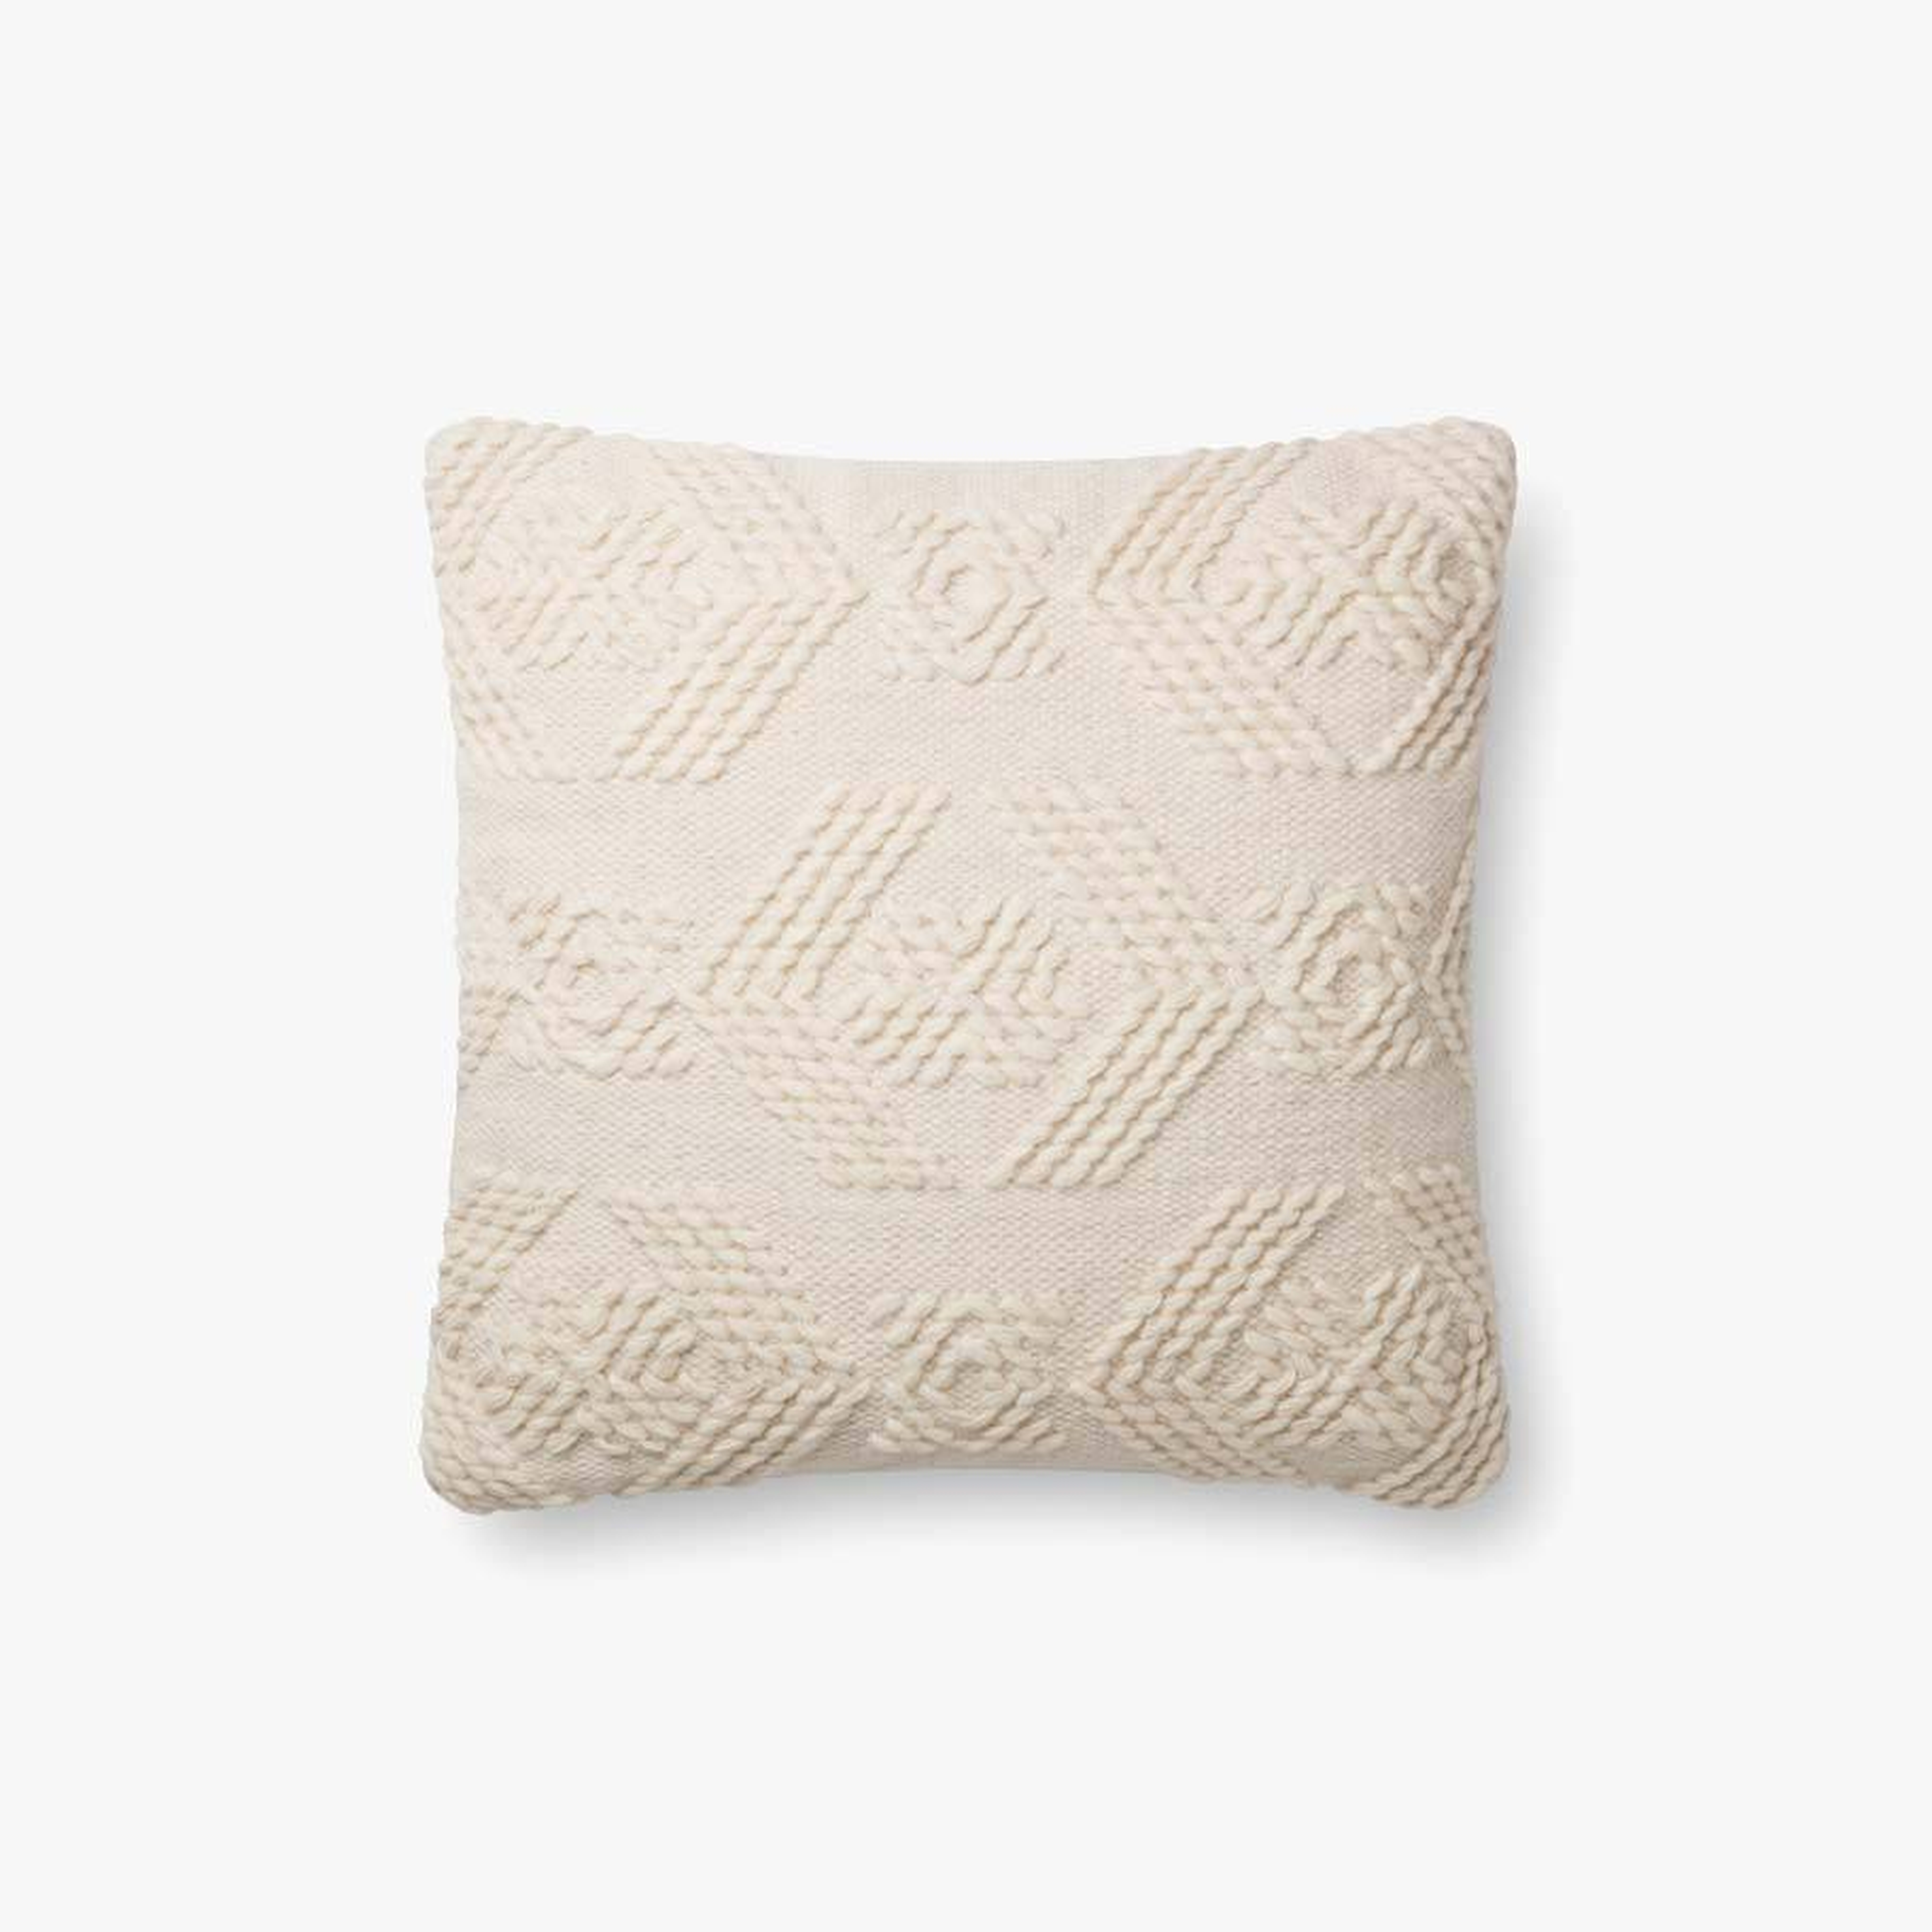 Embroidered Cream Throw Pillow, Poly Fill, 18" x 18" - Loma Threads